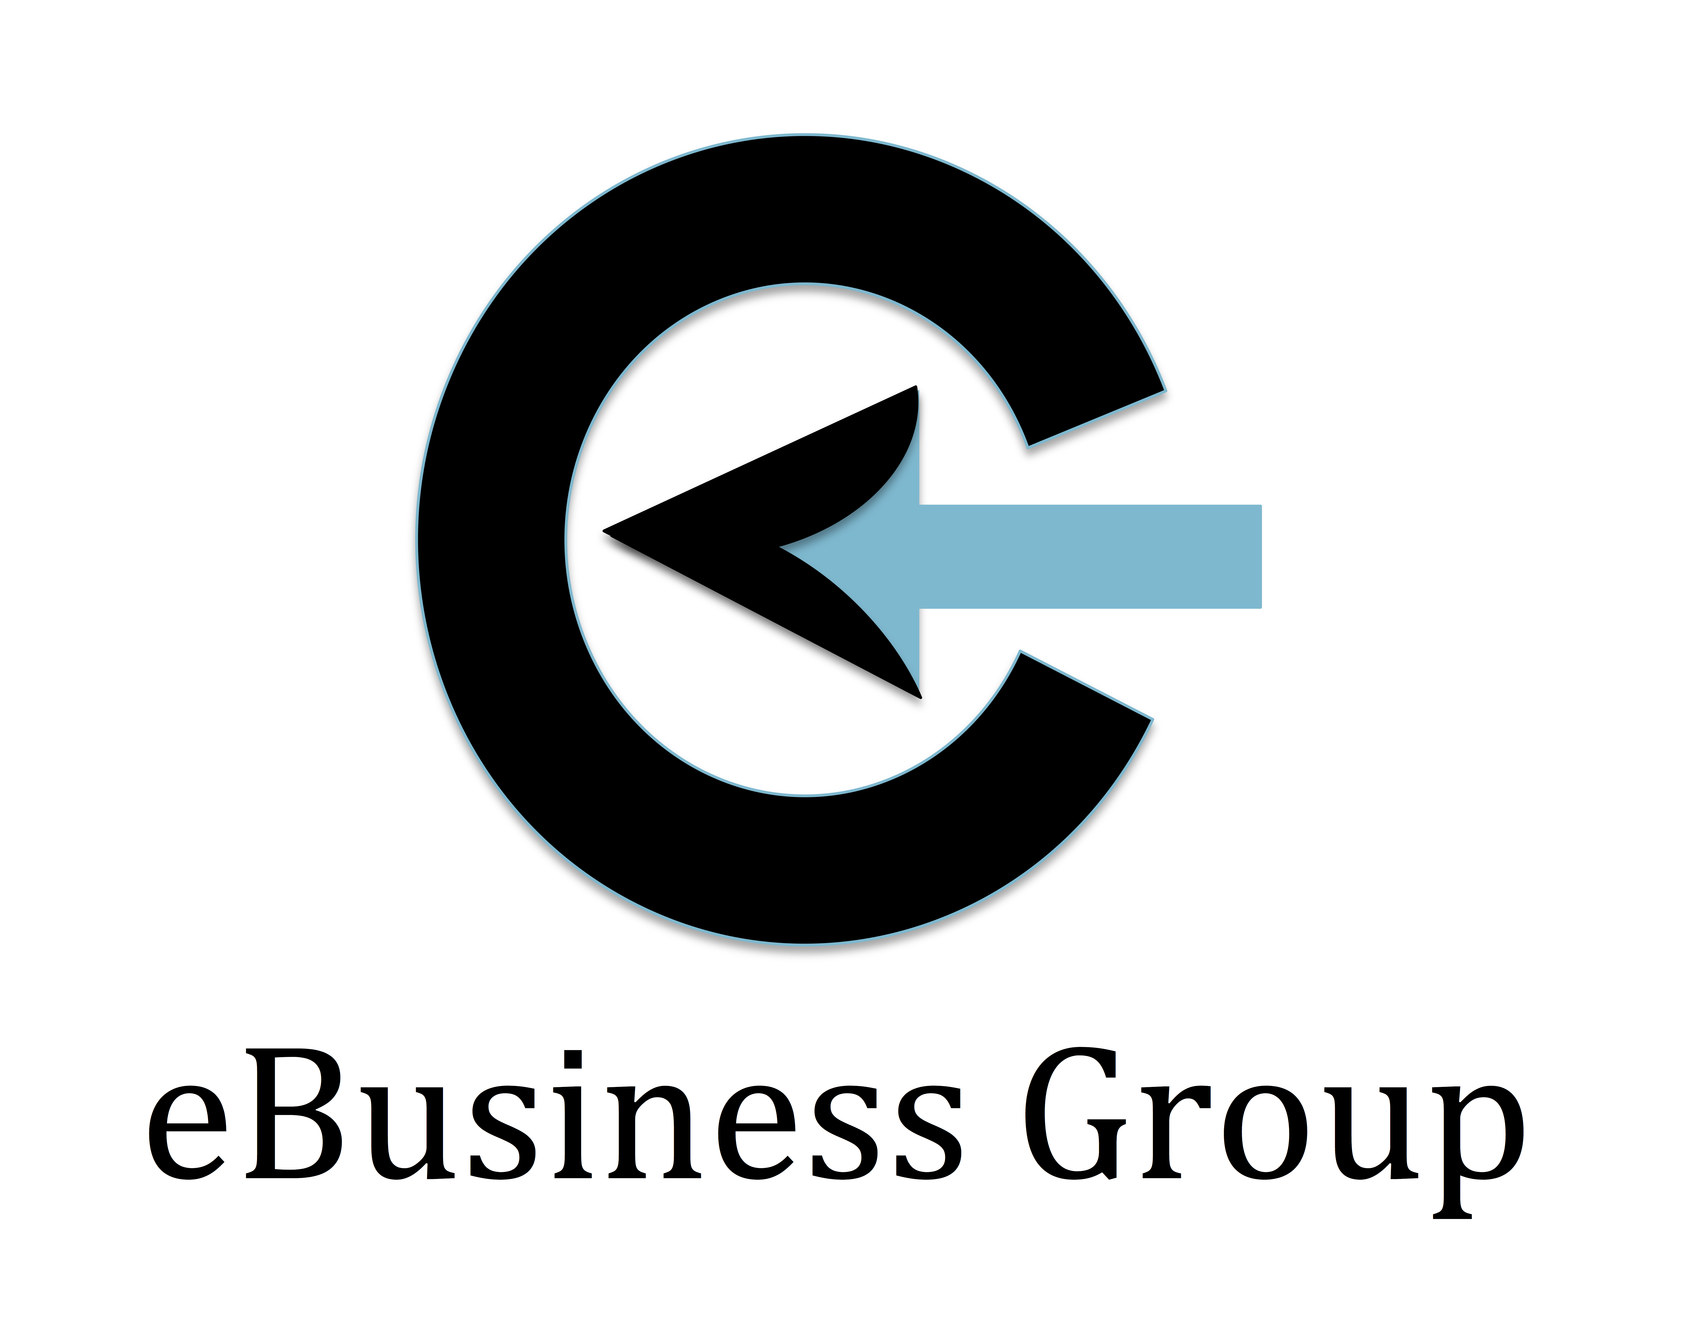 Follow us as we help you become more savvy with the ever changing social media layout. Check out the eBusiness Group: http://t.co/zbPUabDedJ